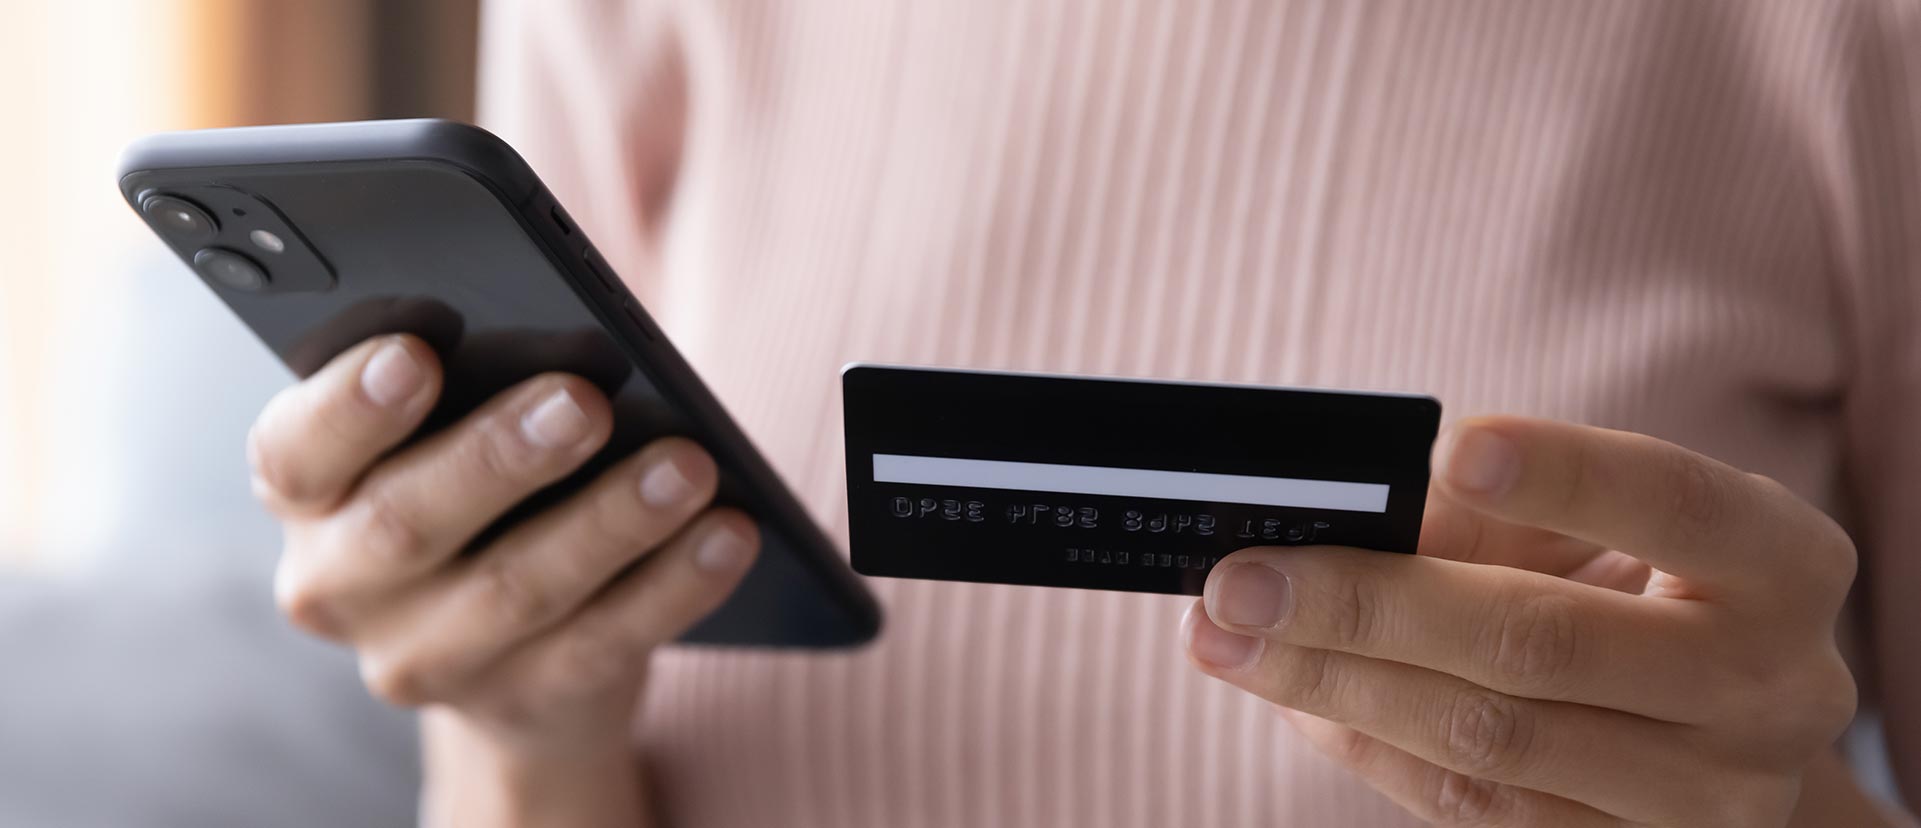 Woman using a credit card for online payment